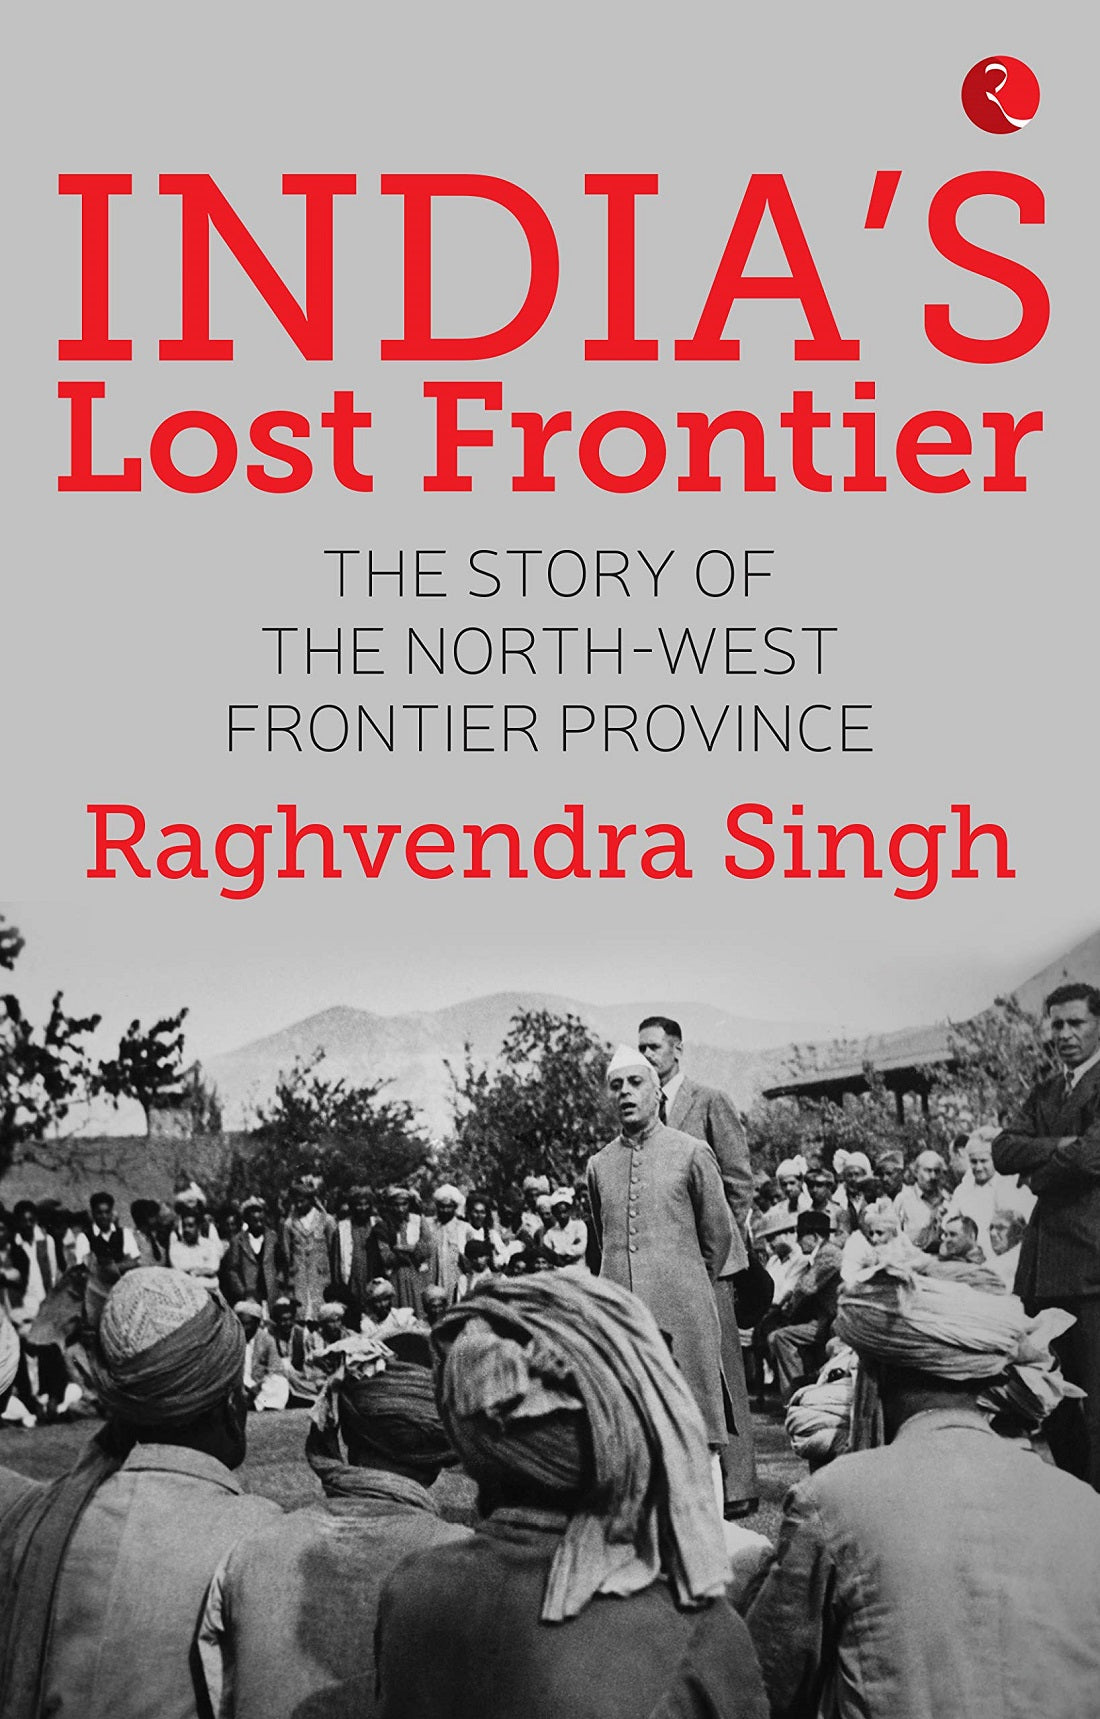 INDIA'S LOST FRONTIER